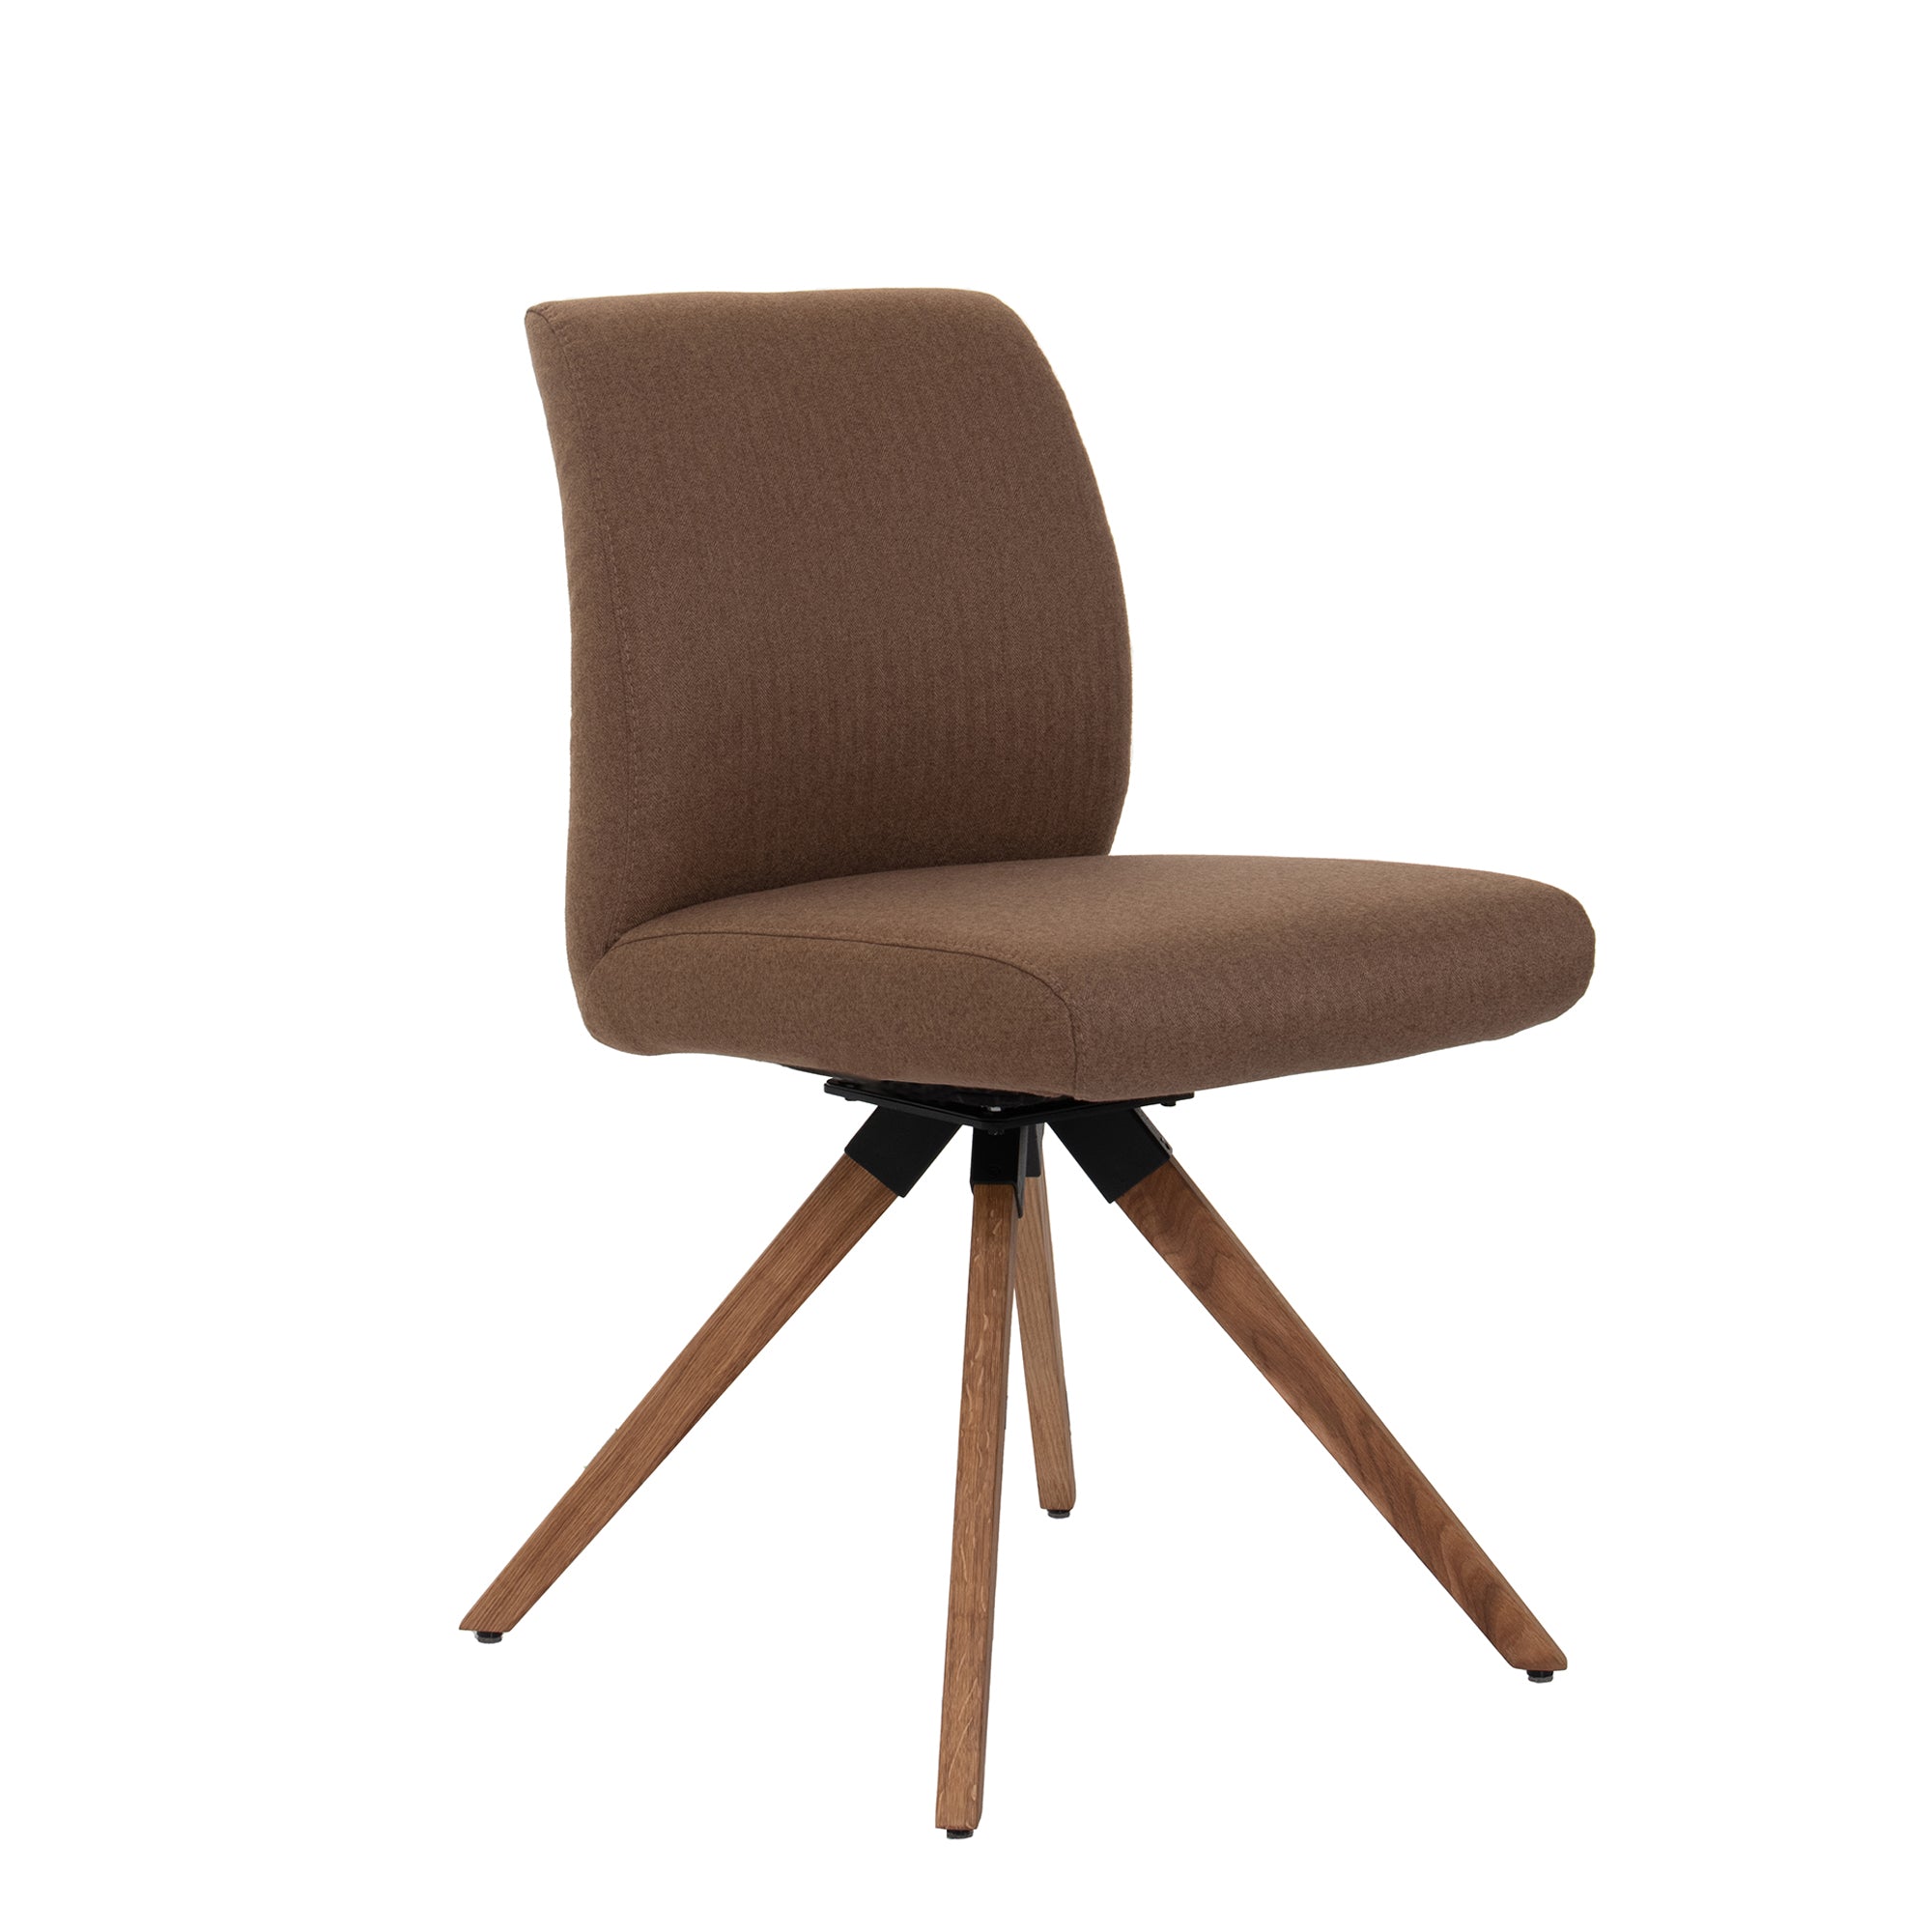 Chair With 'C' Wooden Leg In Group 1